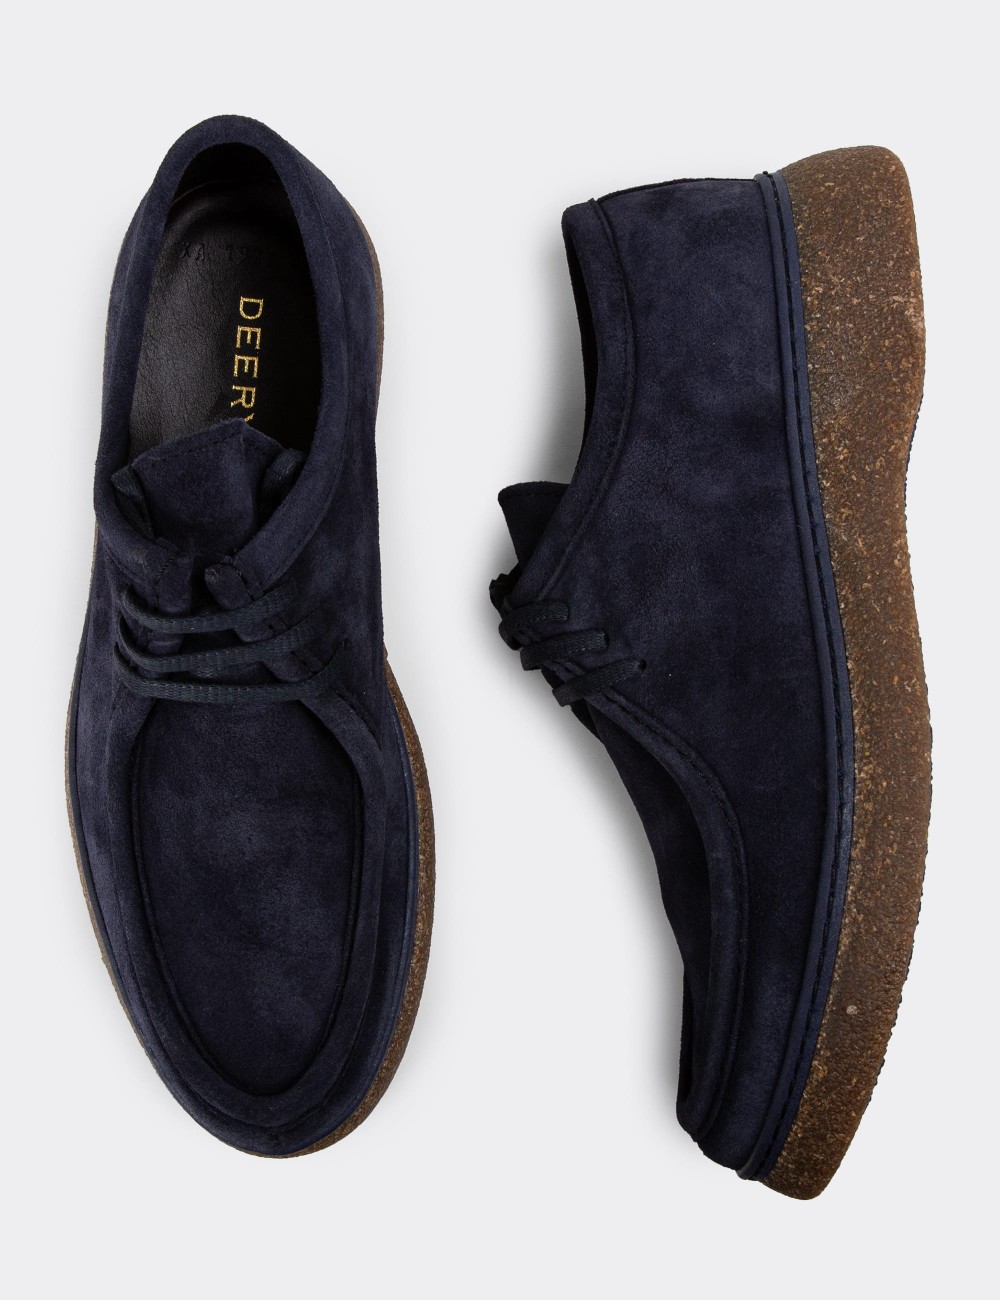 Navy Suede Leather Lace-up Shoes - 01927MLCVC02